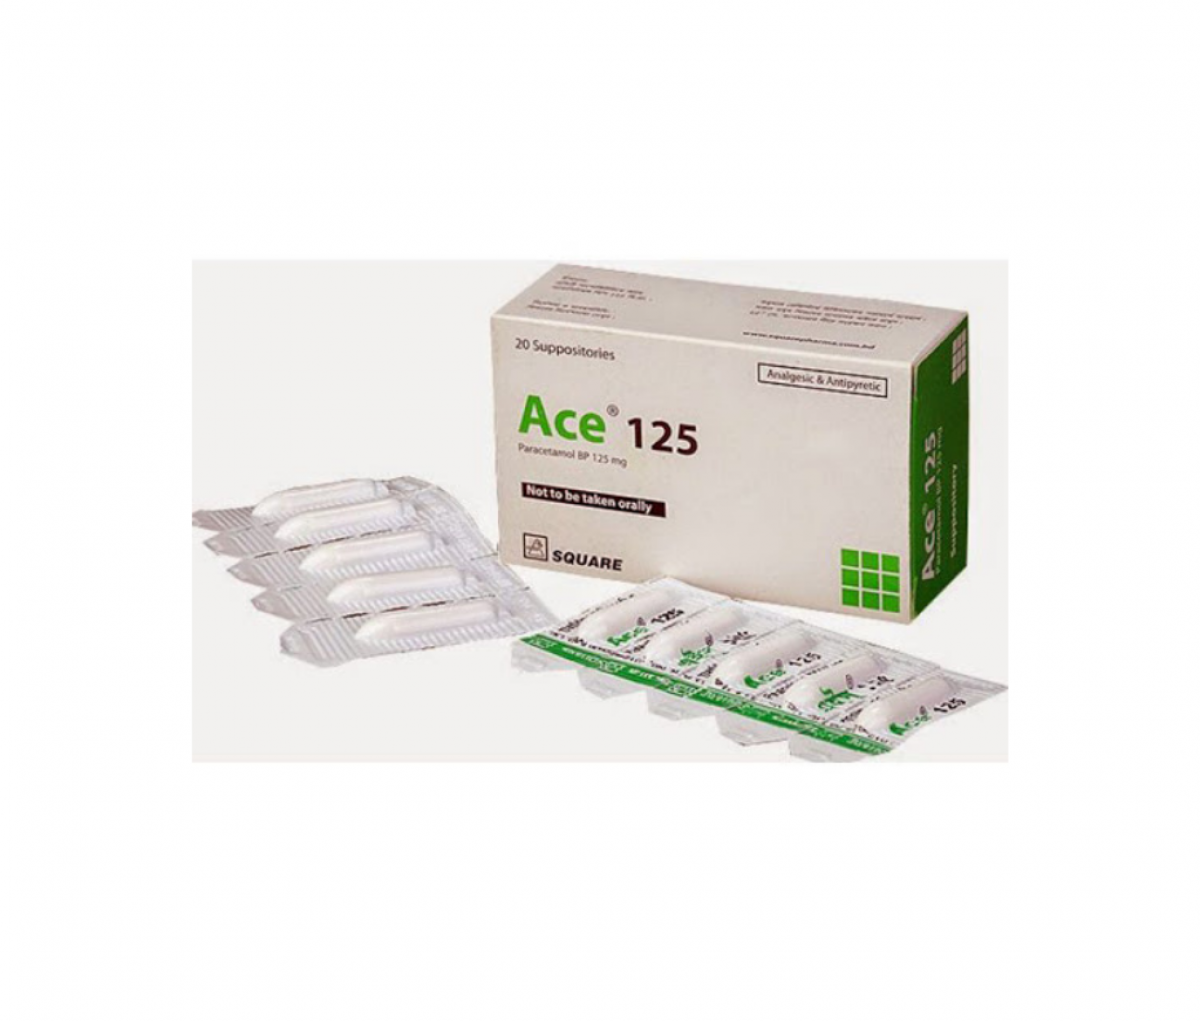 Ace 125mg Suppository